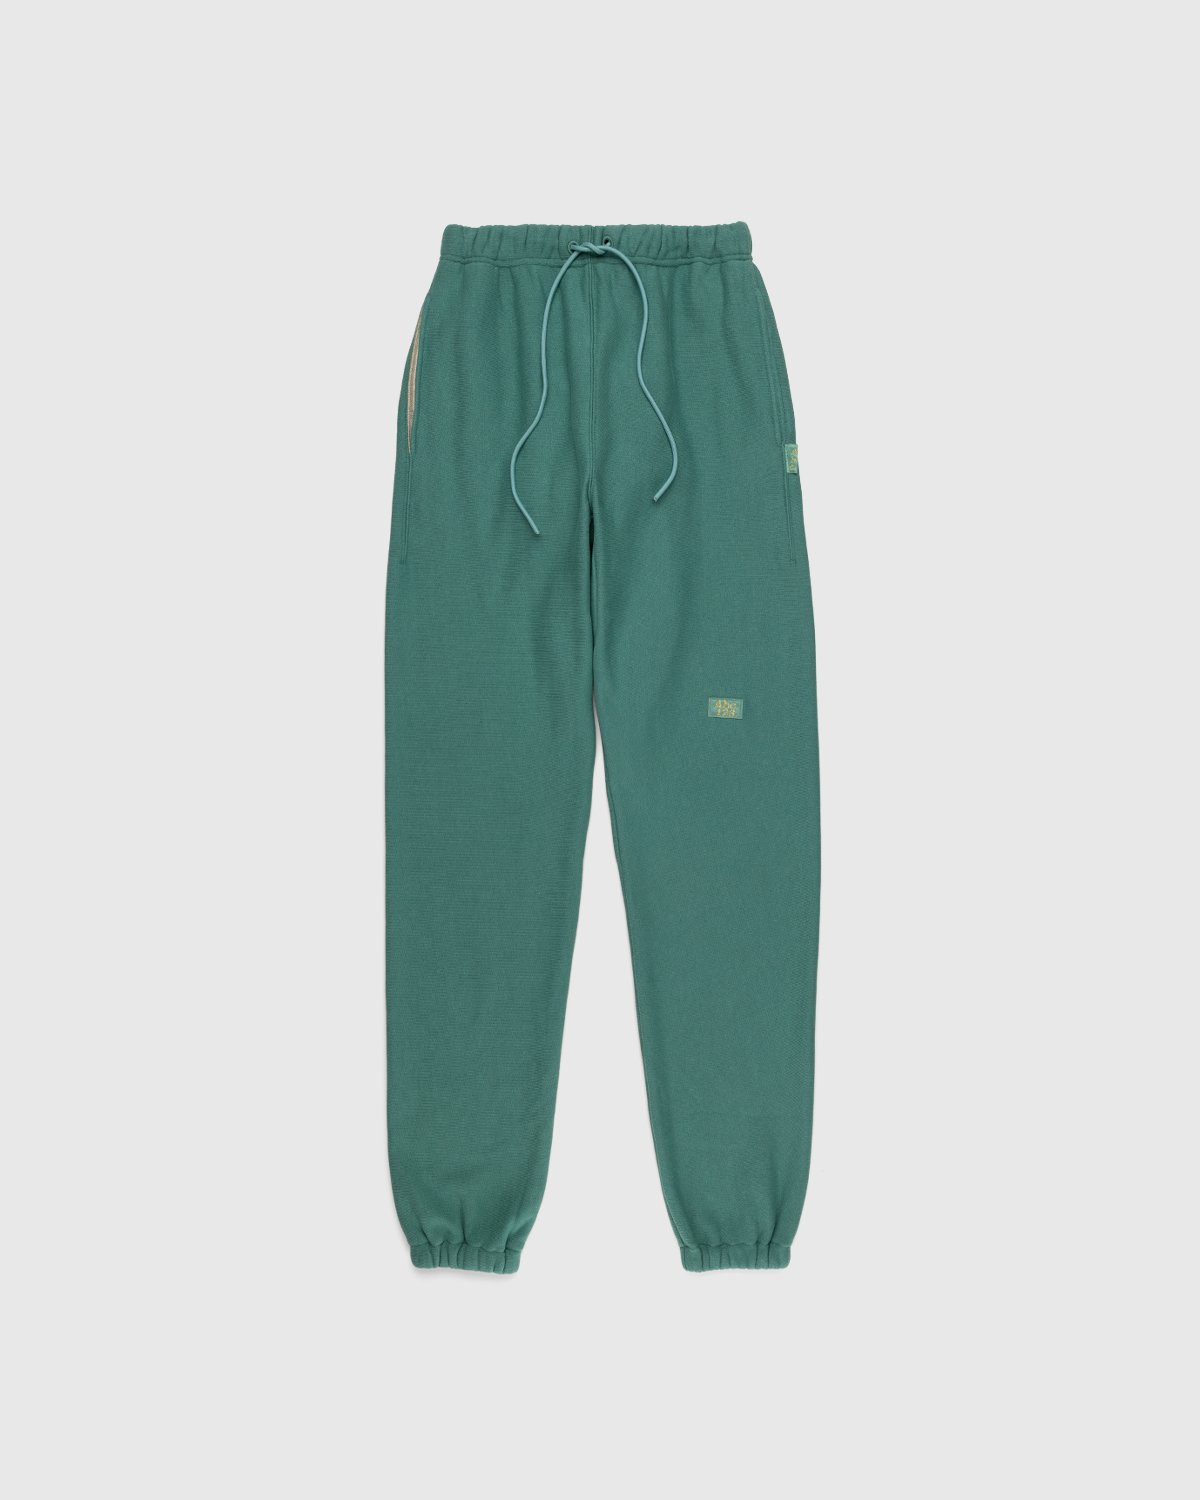 Abc. - French Terry Sweatpants Apatite - Clothing - Green - Image 1